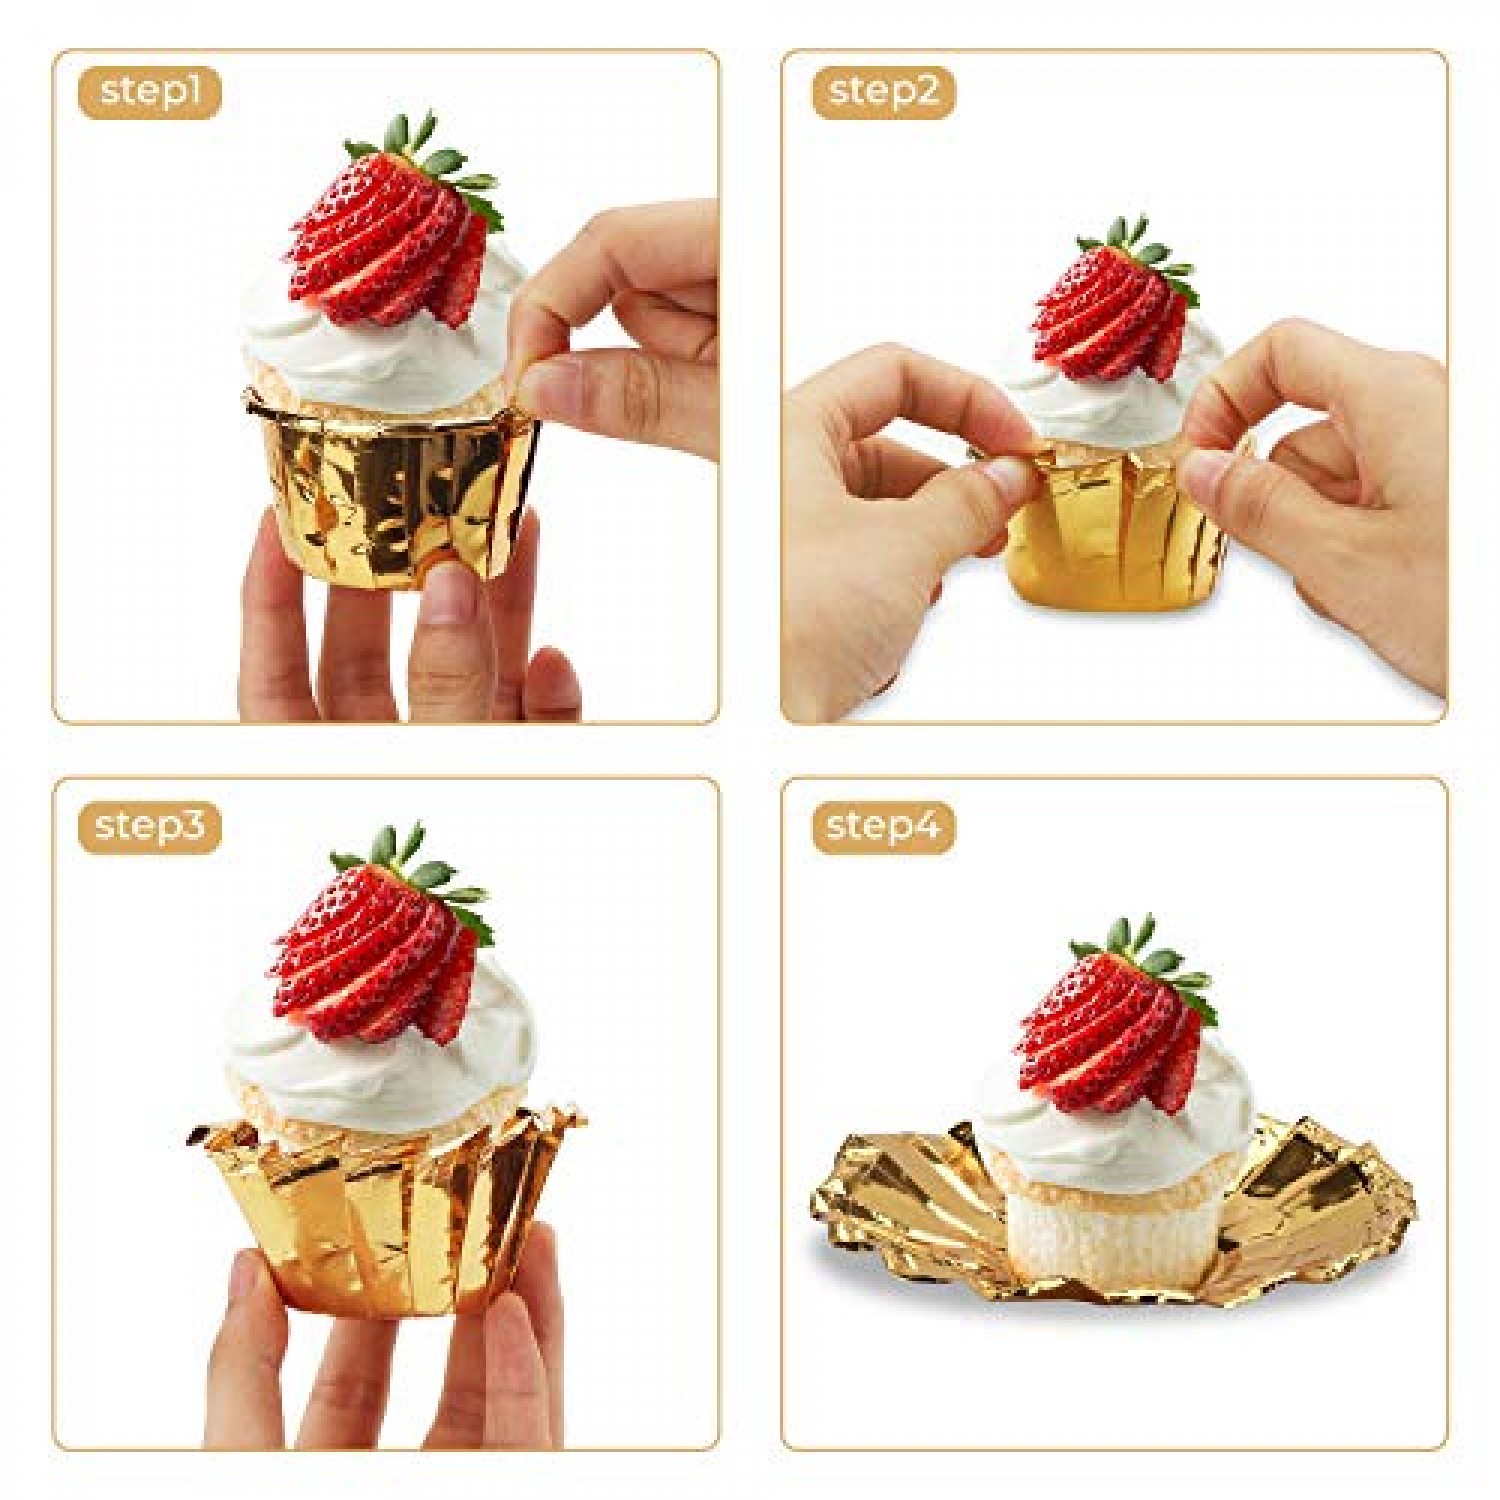 Gold Foil Cupcake Liners, Baking Cups for Muffins and Desserts